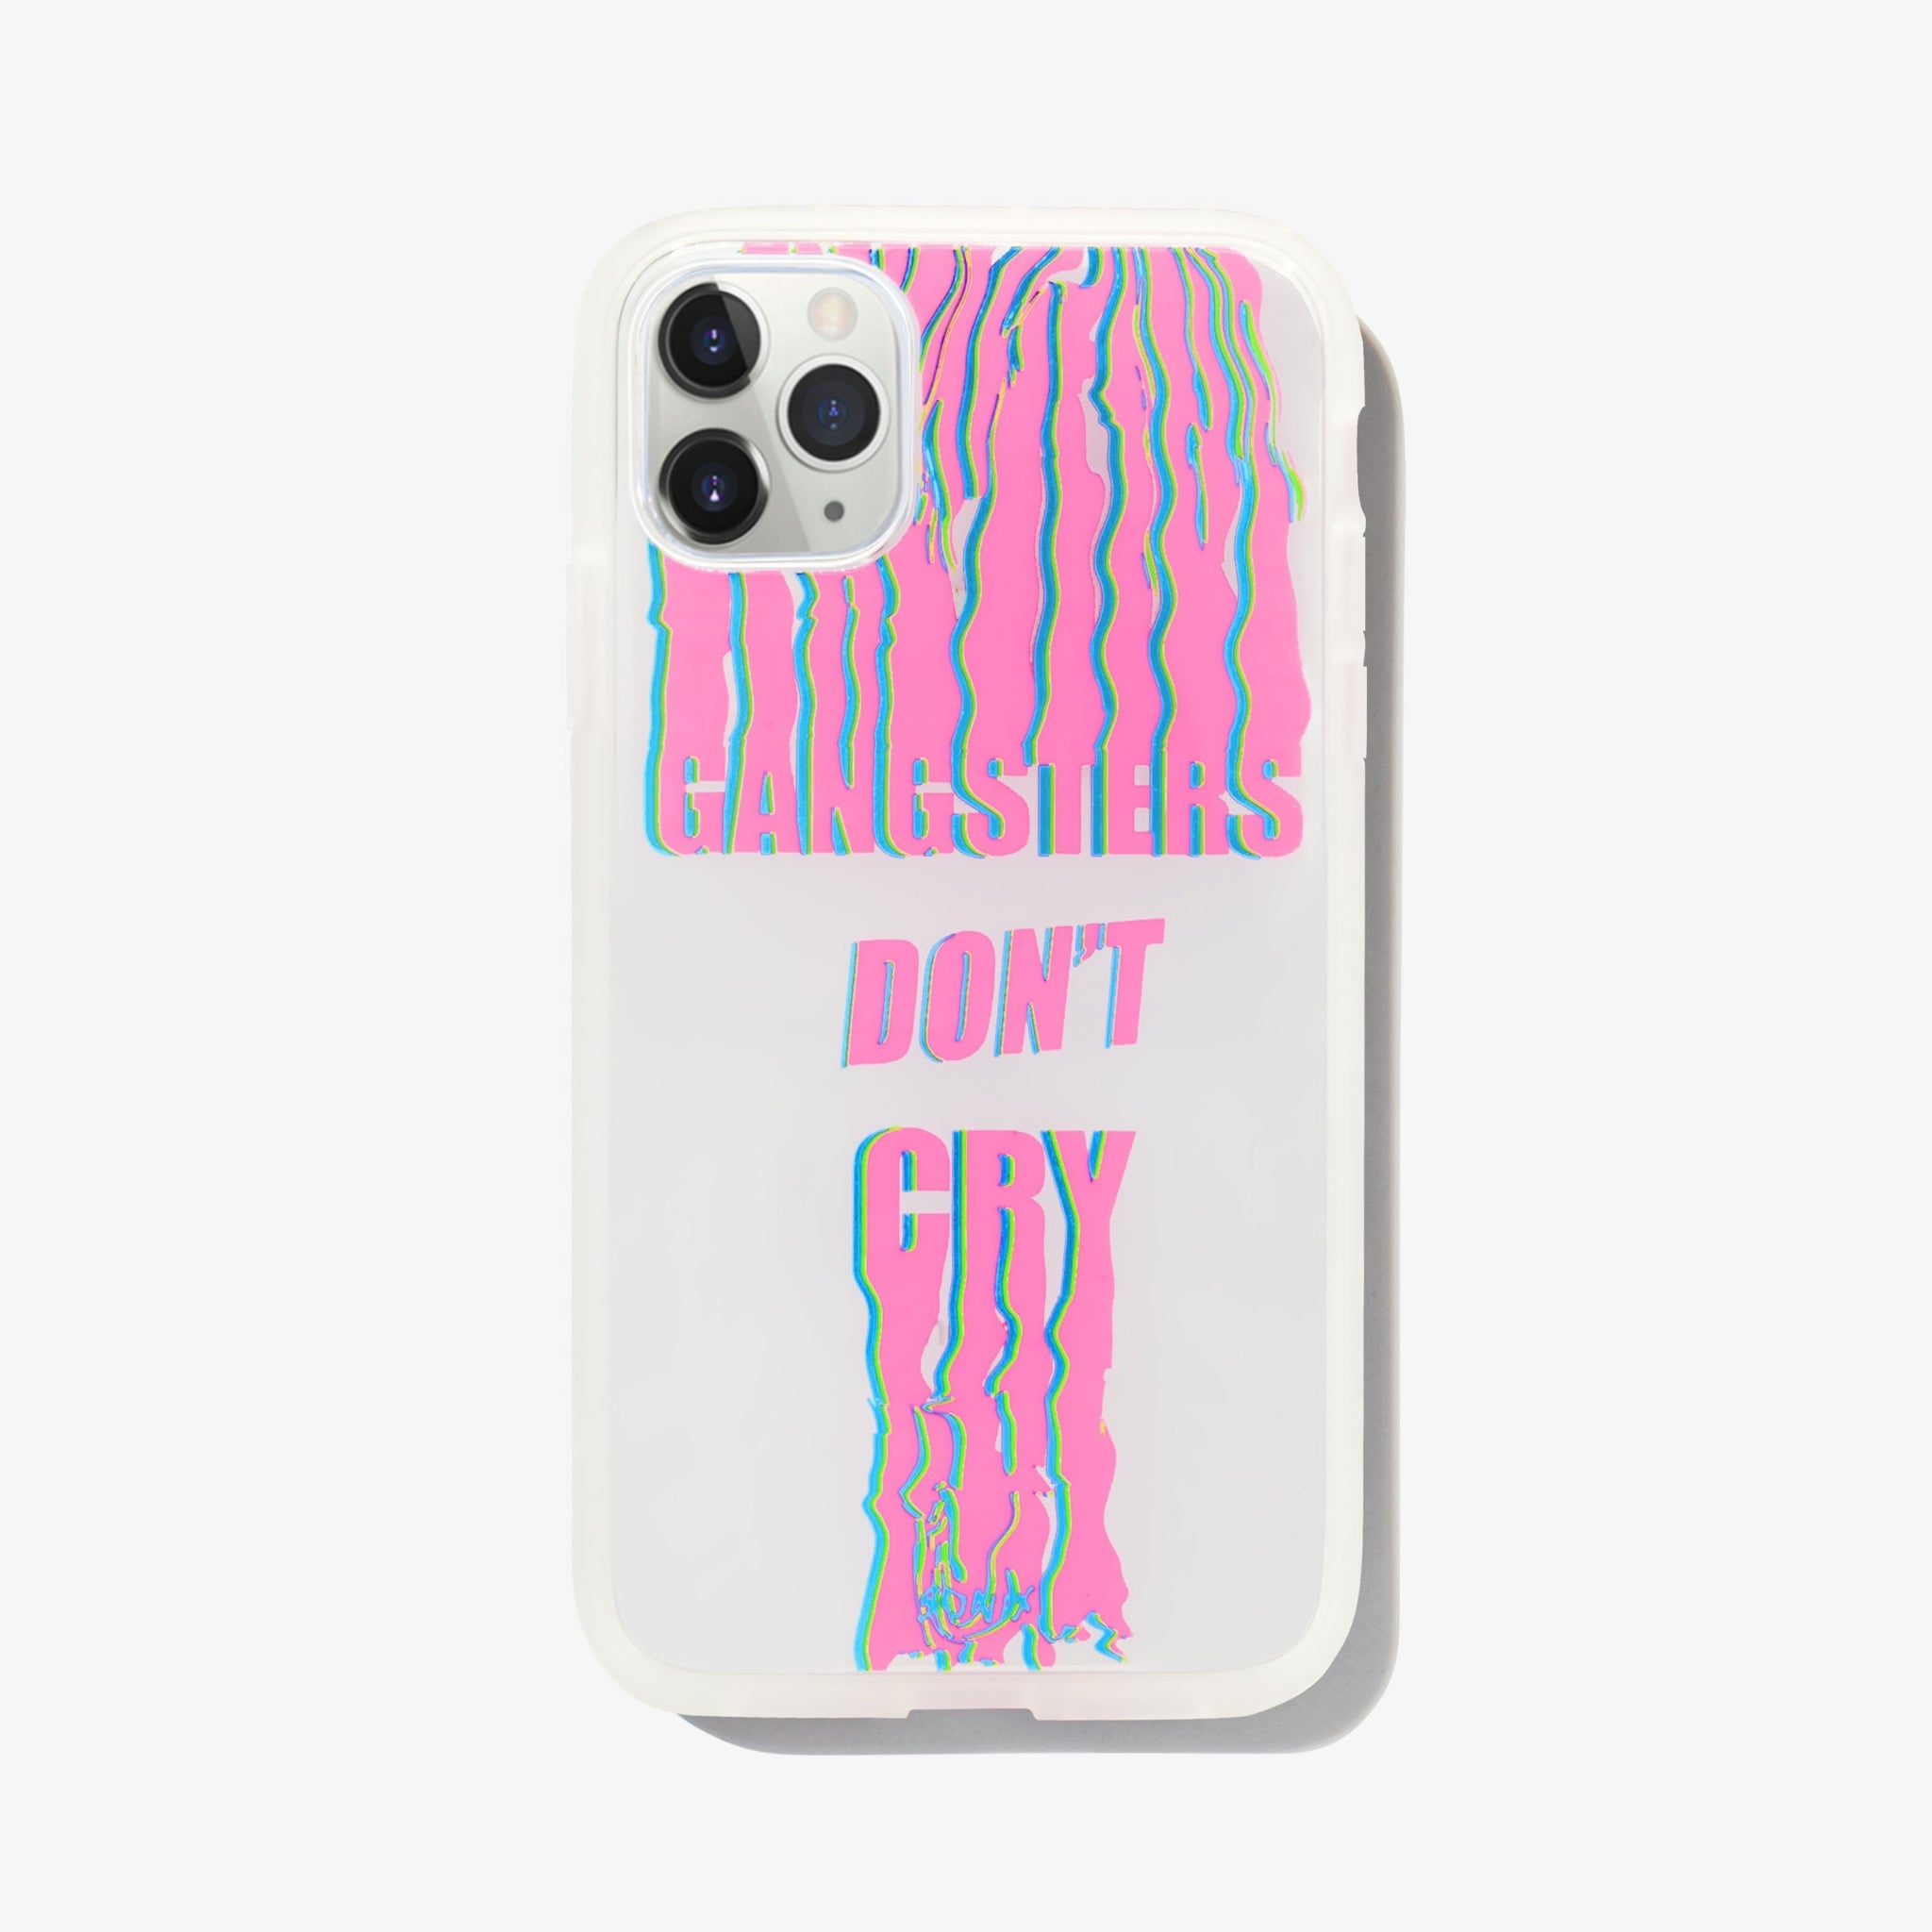 "gangsters dont cry" written in pink and blue wavey lettering shown on an iphone 11 pro